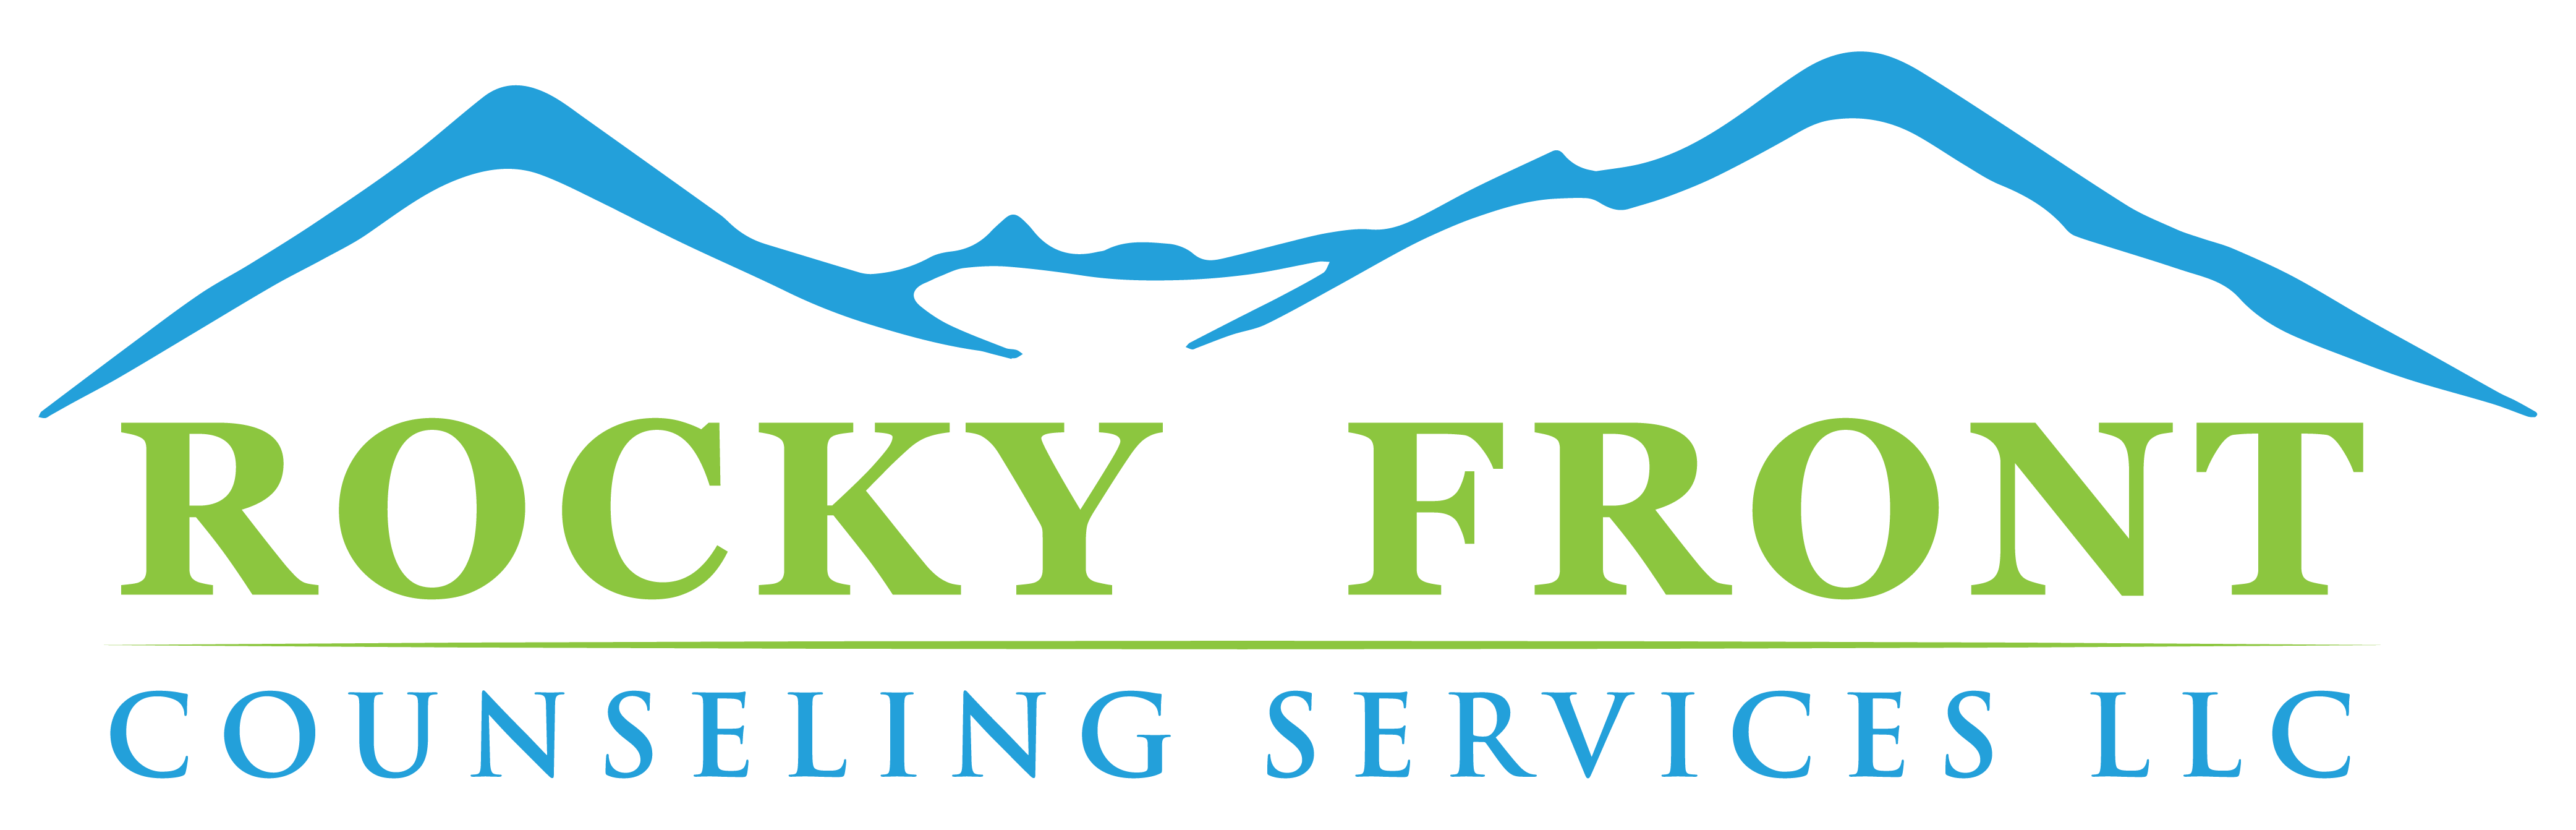 Rocky Front Counseling Services, LLC